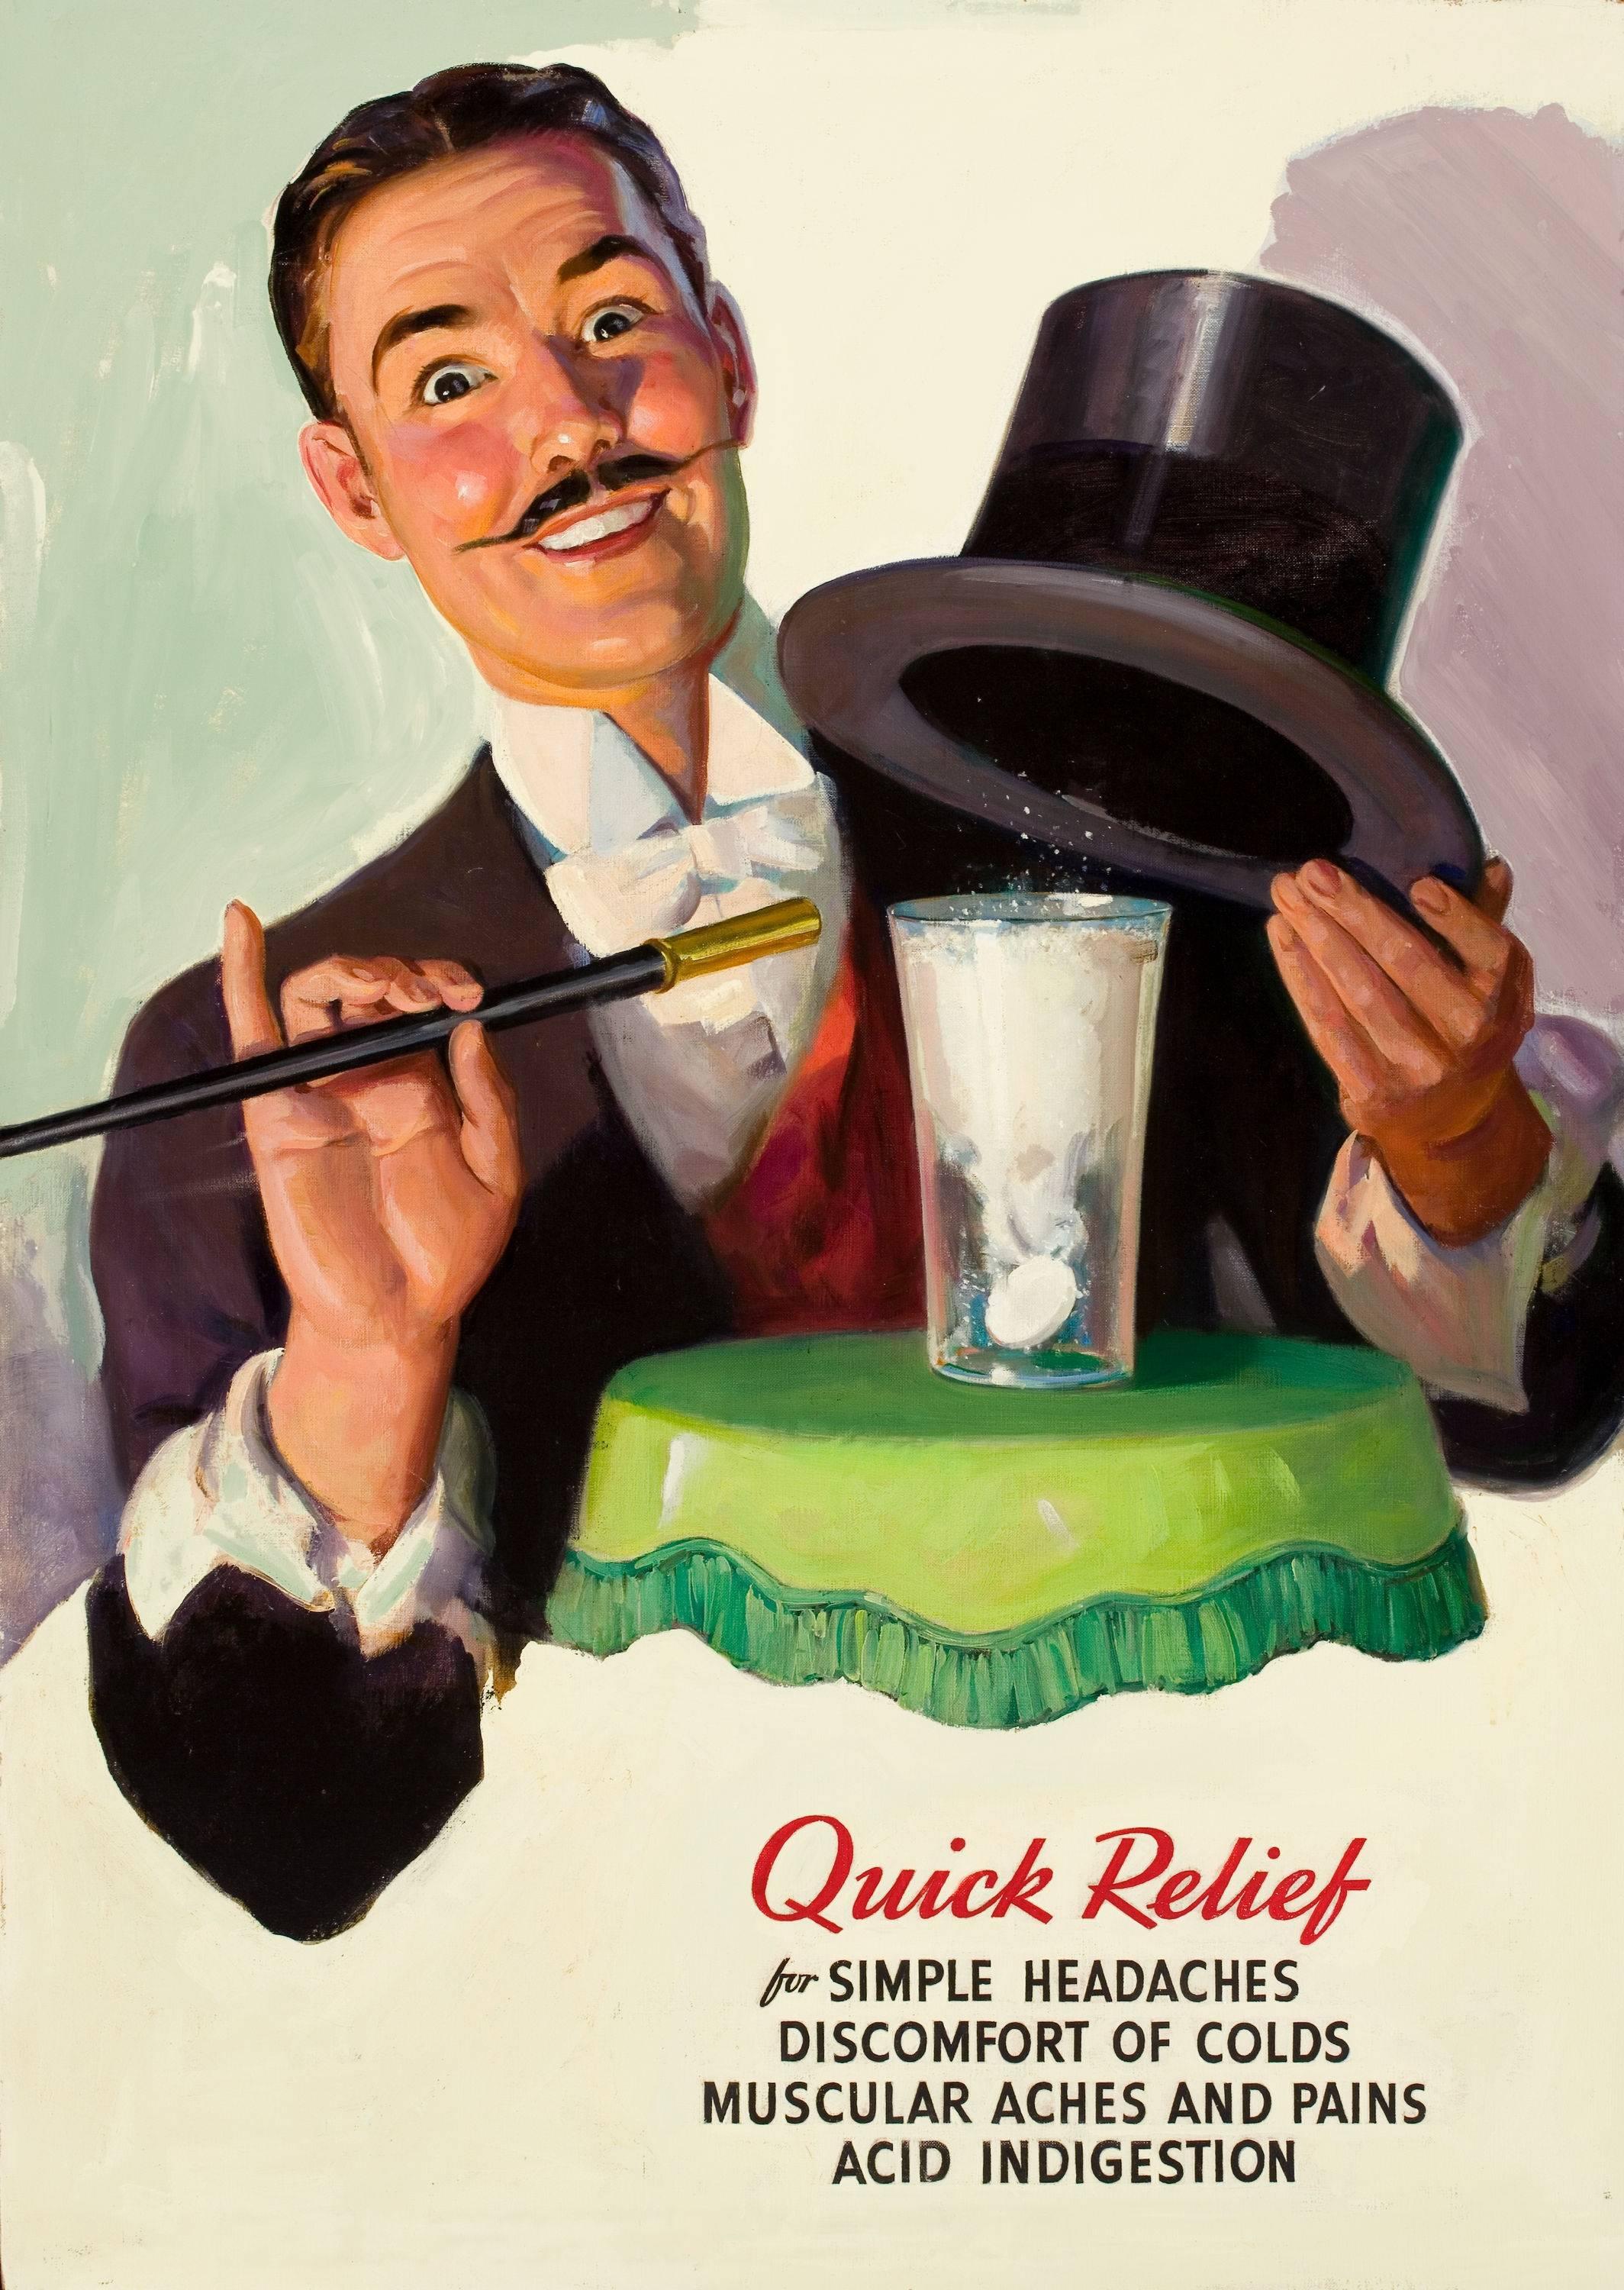 Alka-Seltzer Quick Relief Advertisement Illustration - Painting by Russell Sambrook